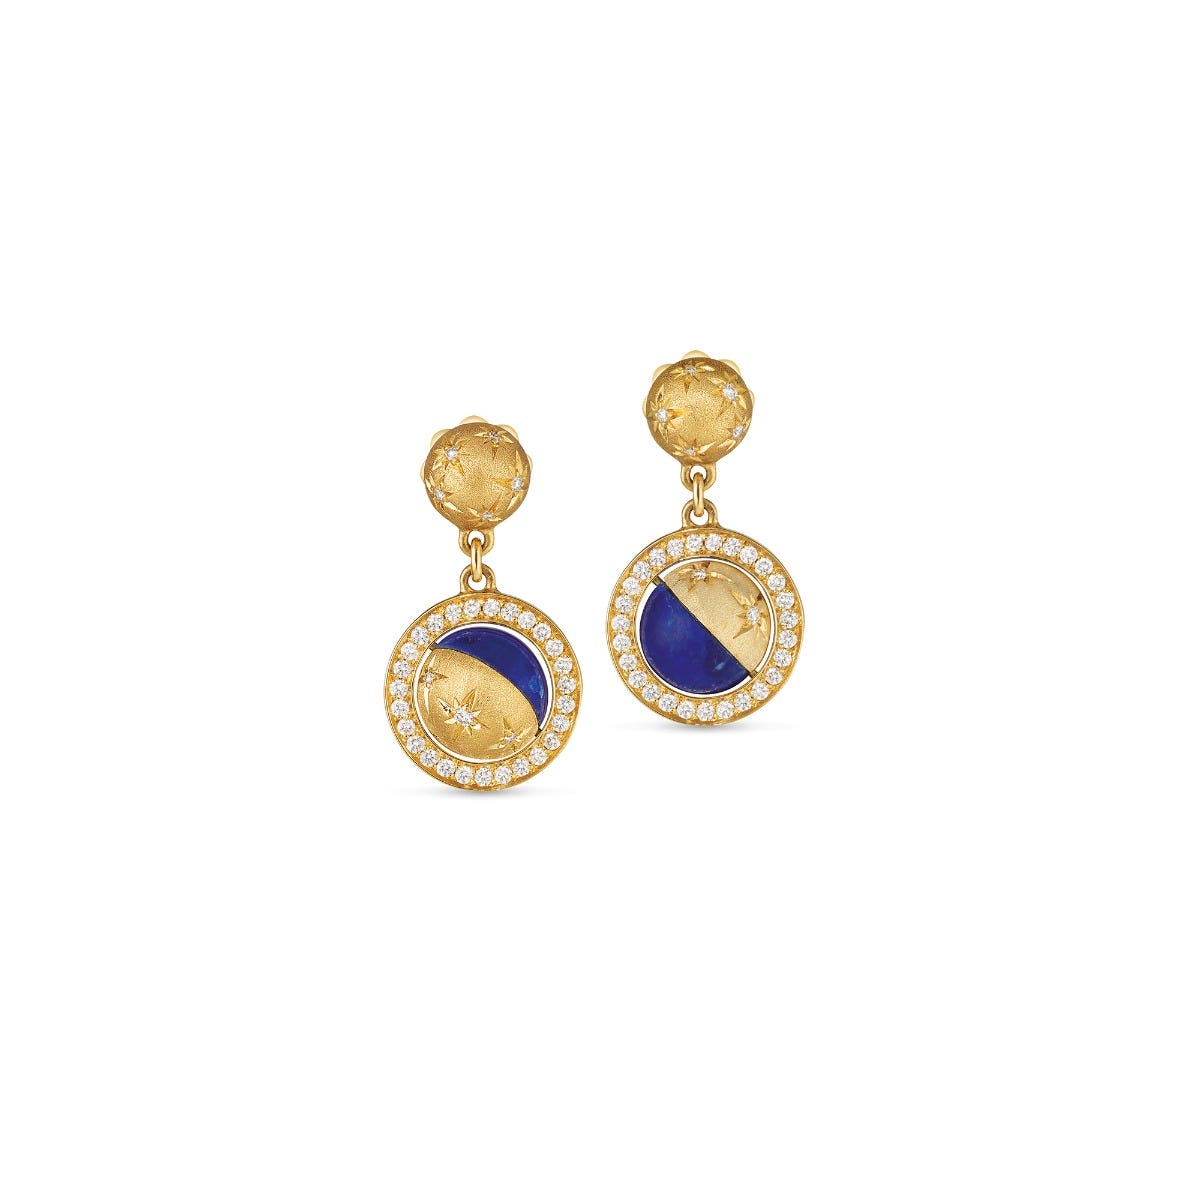 Cosmic Orbit Earrings in 18ct Yellow Gold with Lapis and Diamonds